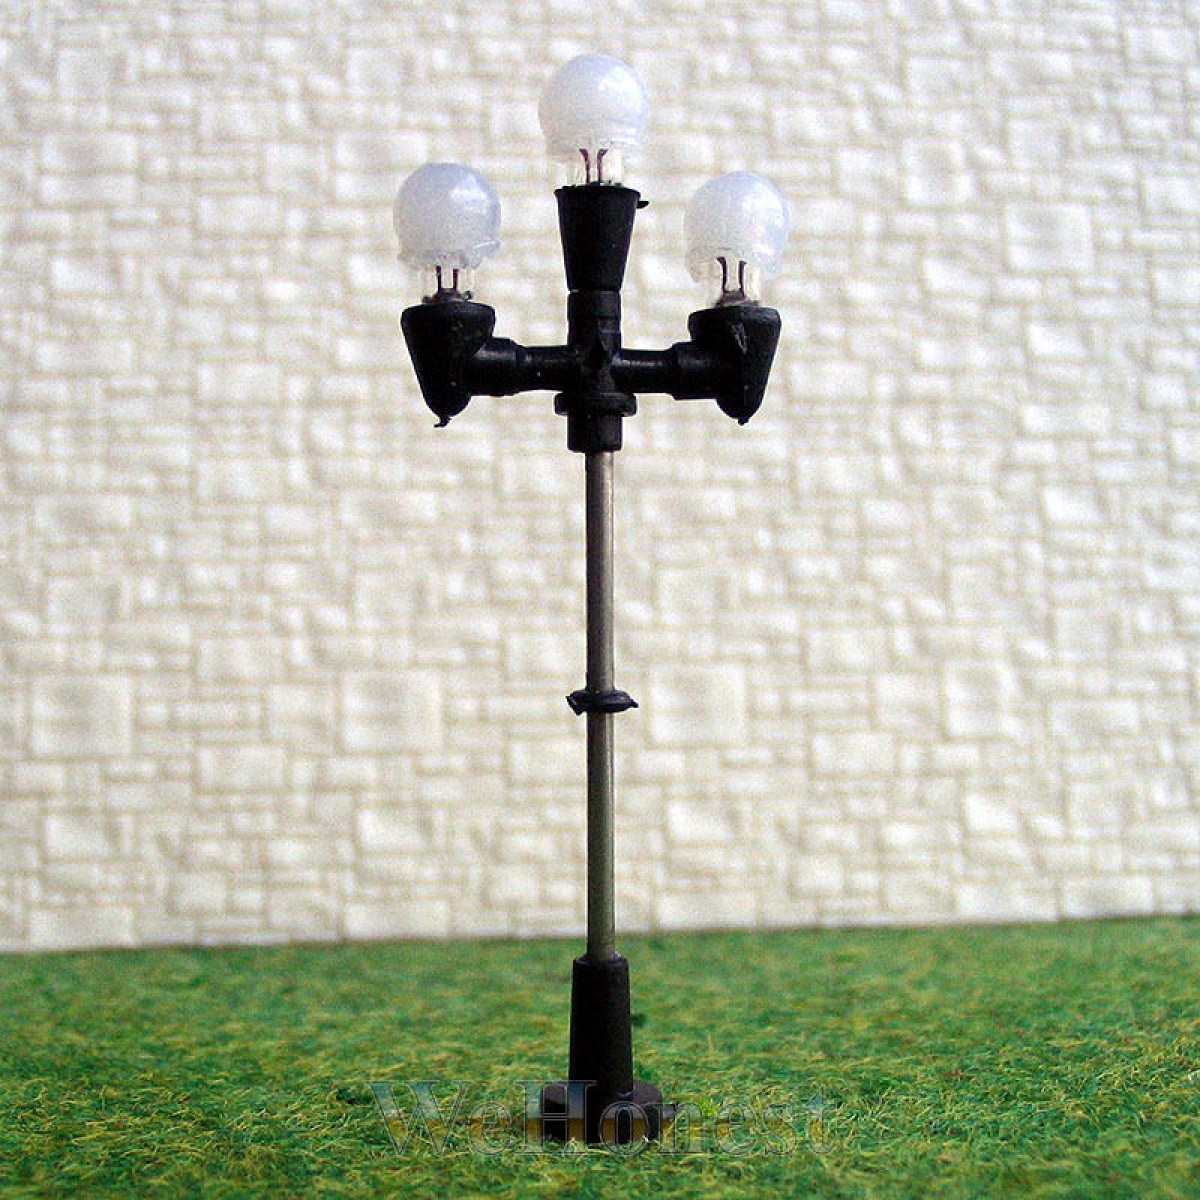 5 x  HO 3 pearl heads antique lights model Lampposts